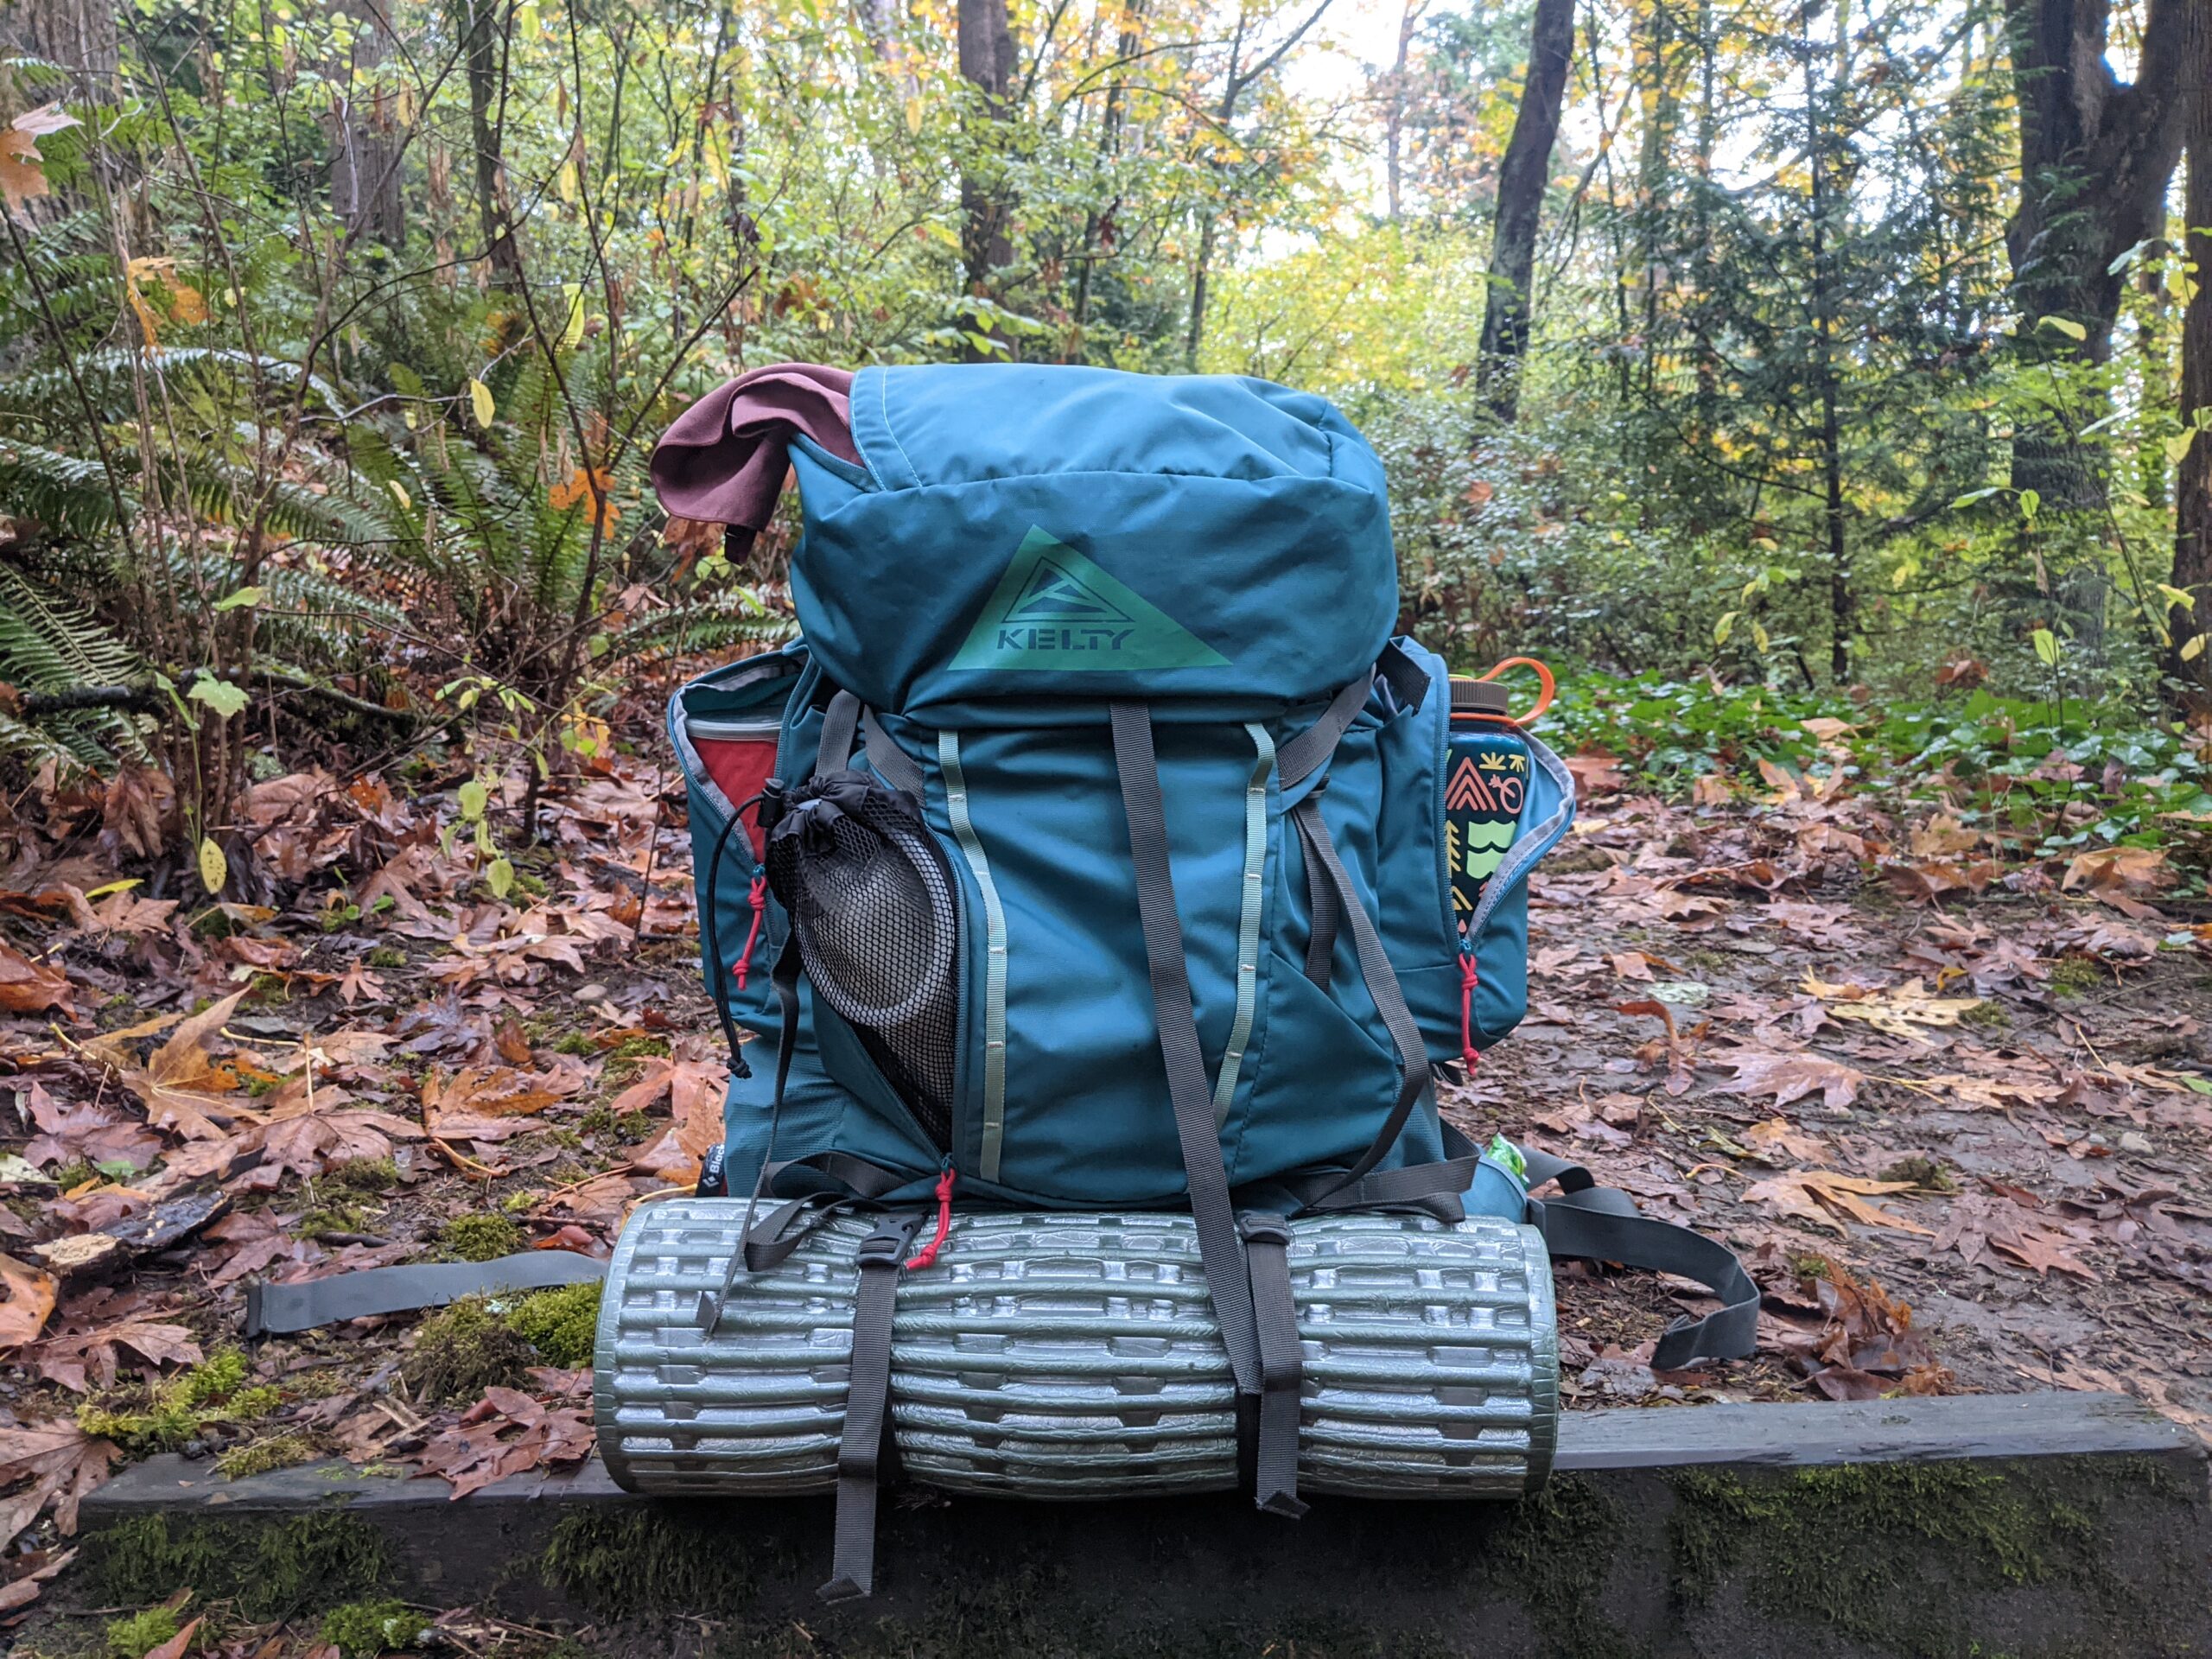 The Kelty Coyote is one of the best backpacking backpacks.